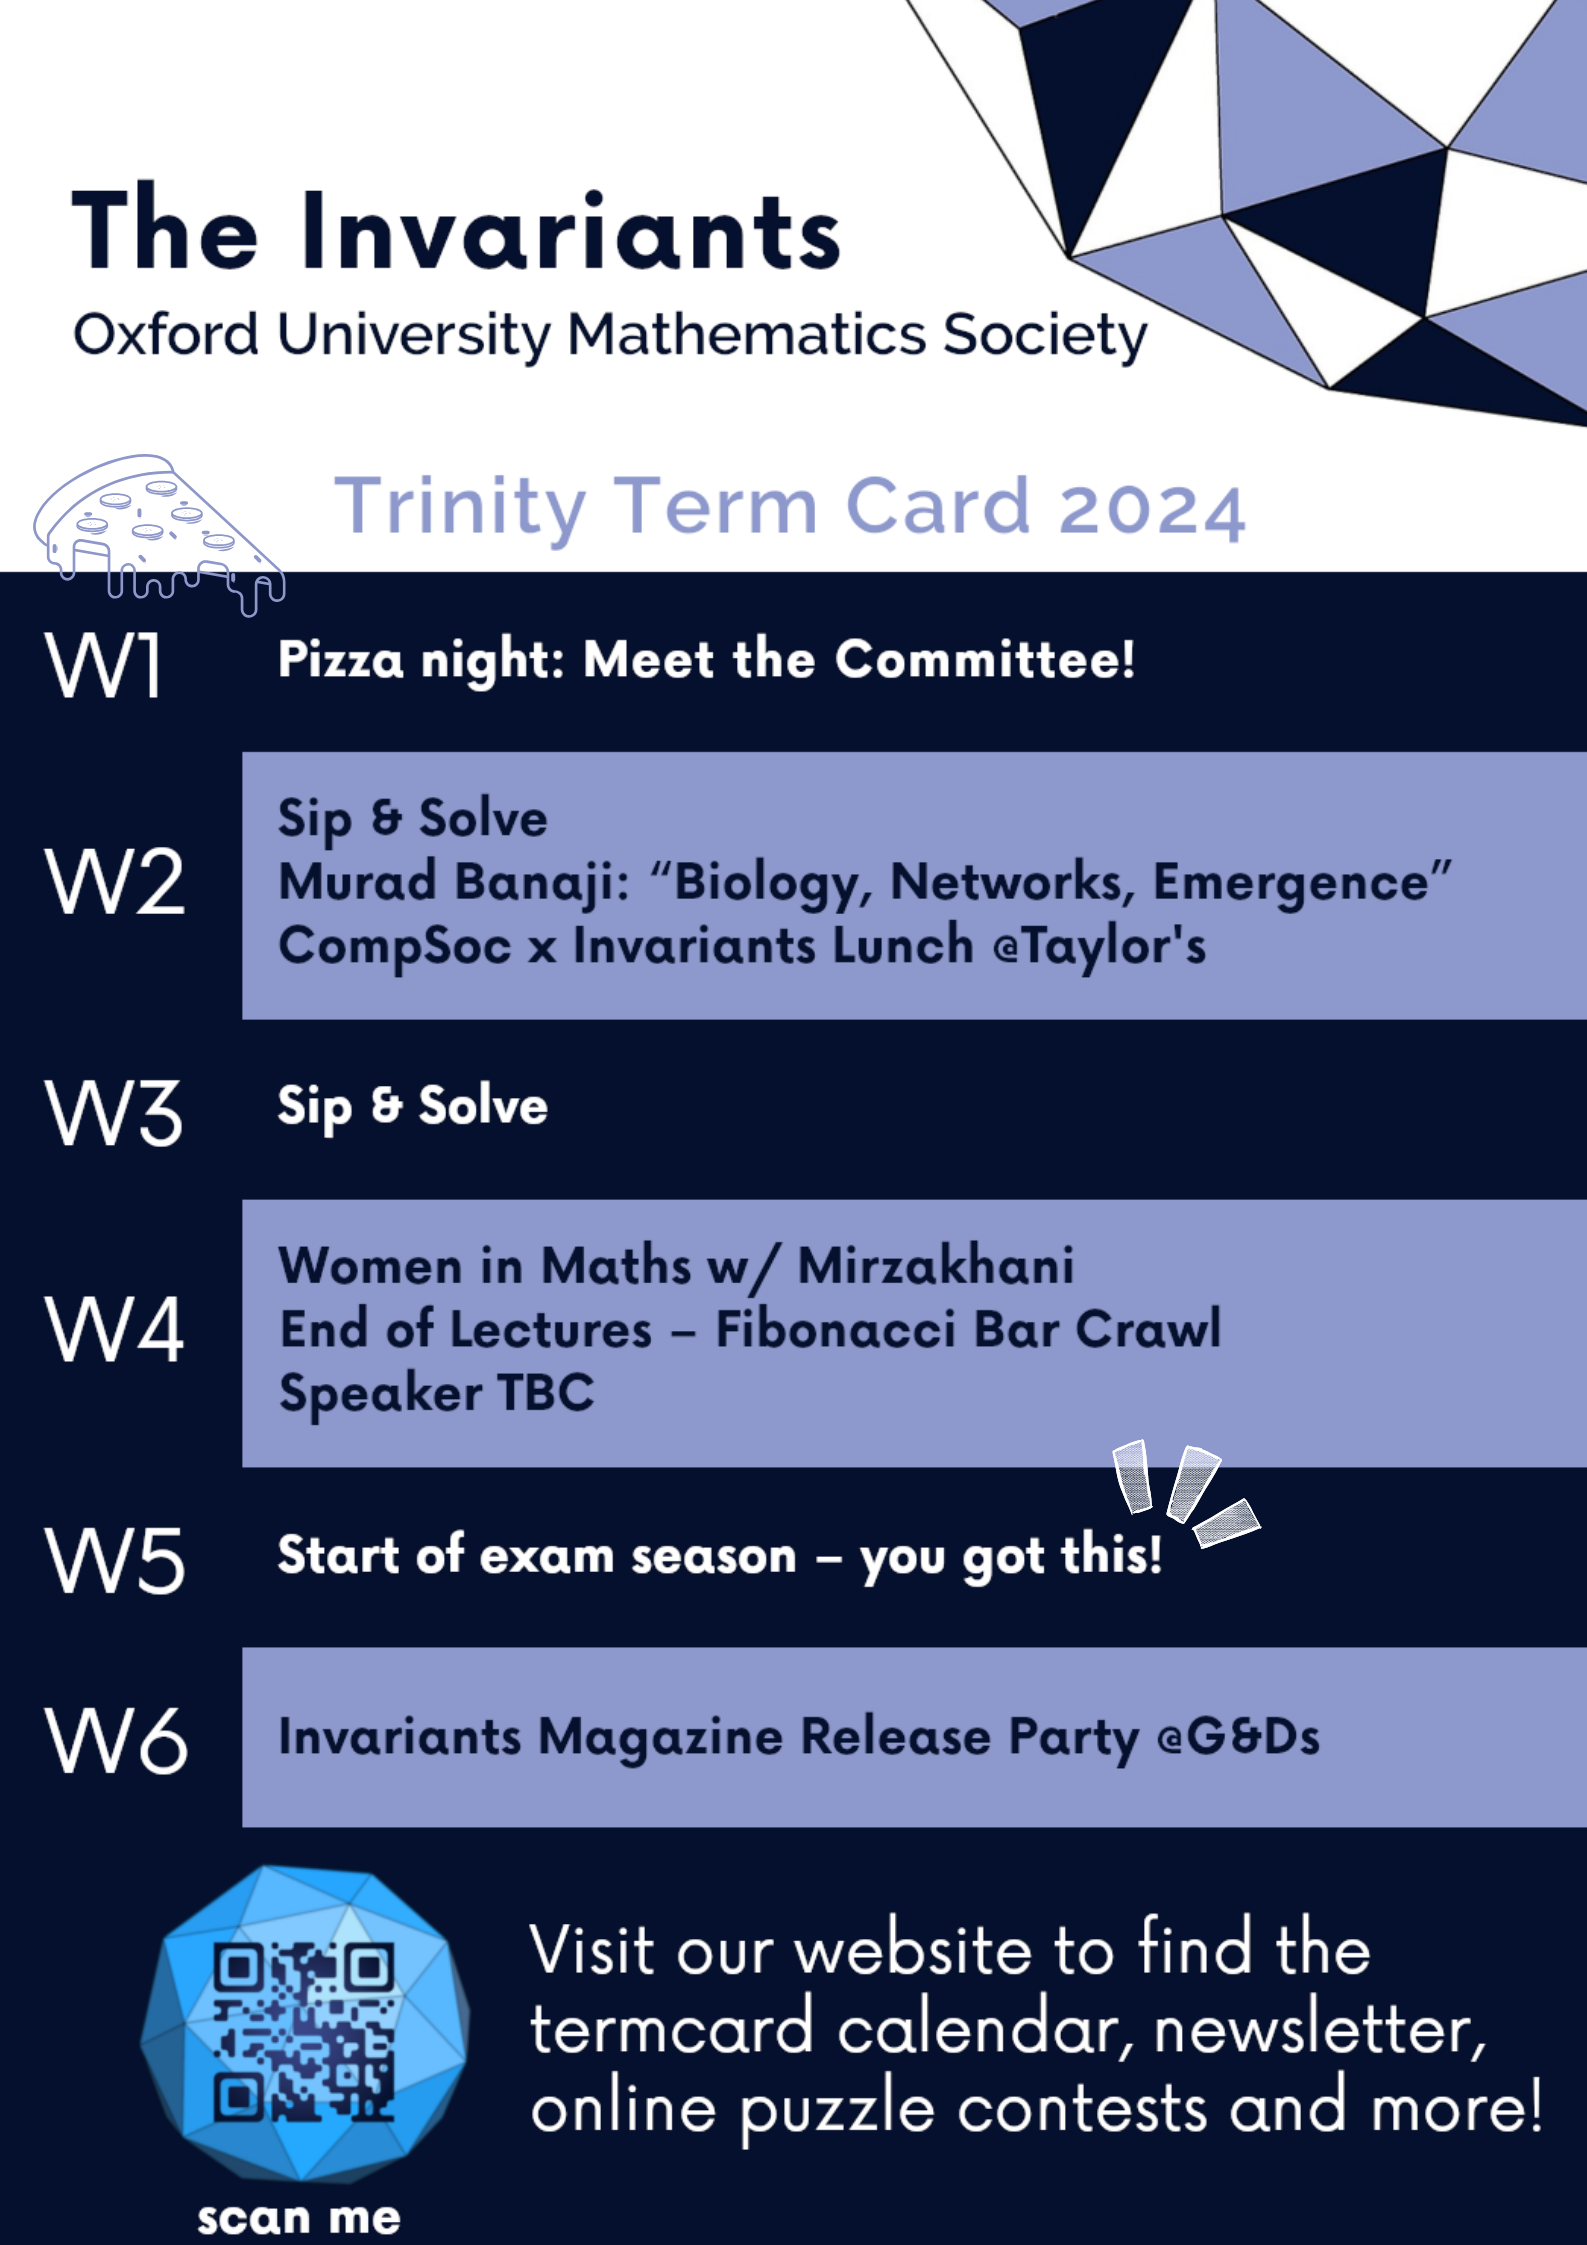 Week 1
Pizza night: Meet the Committee!

Week 2
Sip & Solve
Murad Banaji: "Biology, Networks, Emergence"
CompSoc x Invariants Lunch @Taylor's

Week 3
Sip & Solve

Week 4
Women in Maths w/ Mirzakhani
End of Lectures - Fibonacci Bar Crawl
Speaker TBC

Week 5
Start of exam season - you got this!

Week 6
Invariants Magazine Release Party @G&Ds

Visit our website to find the termcard calendar, newsletter, online puzzle contests and more!